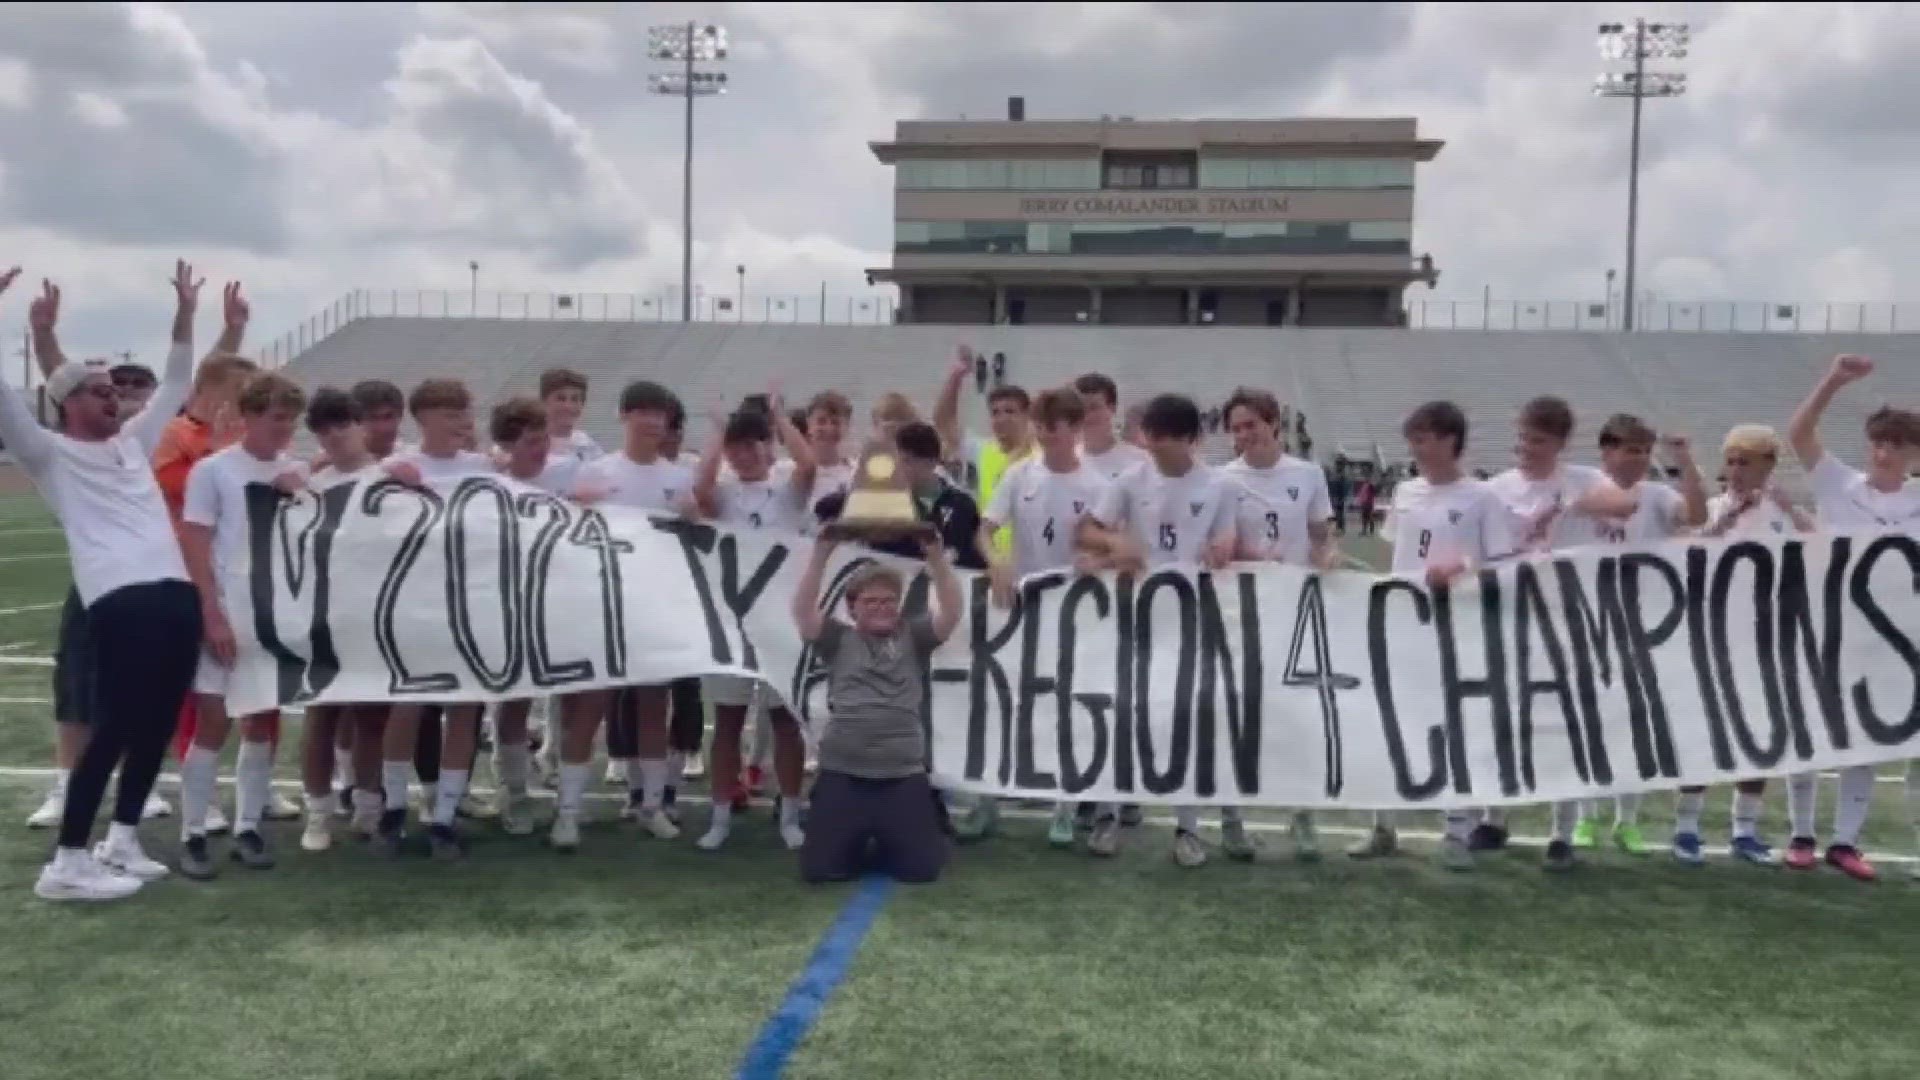 The Vandegrift boys soccer team will be battling Lewisville Flower Mound in the state semifinals.